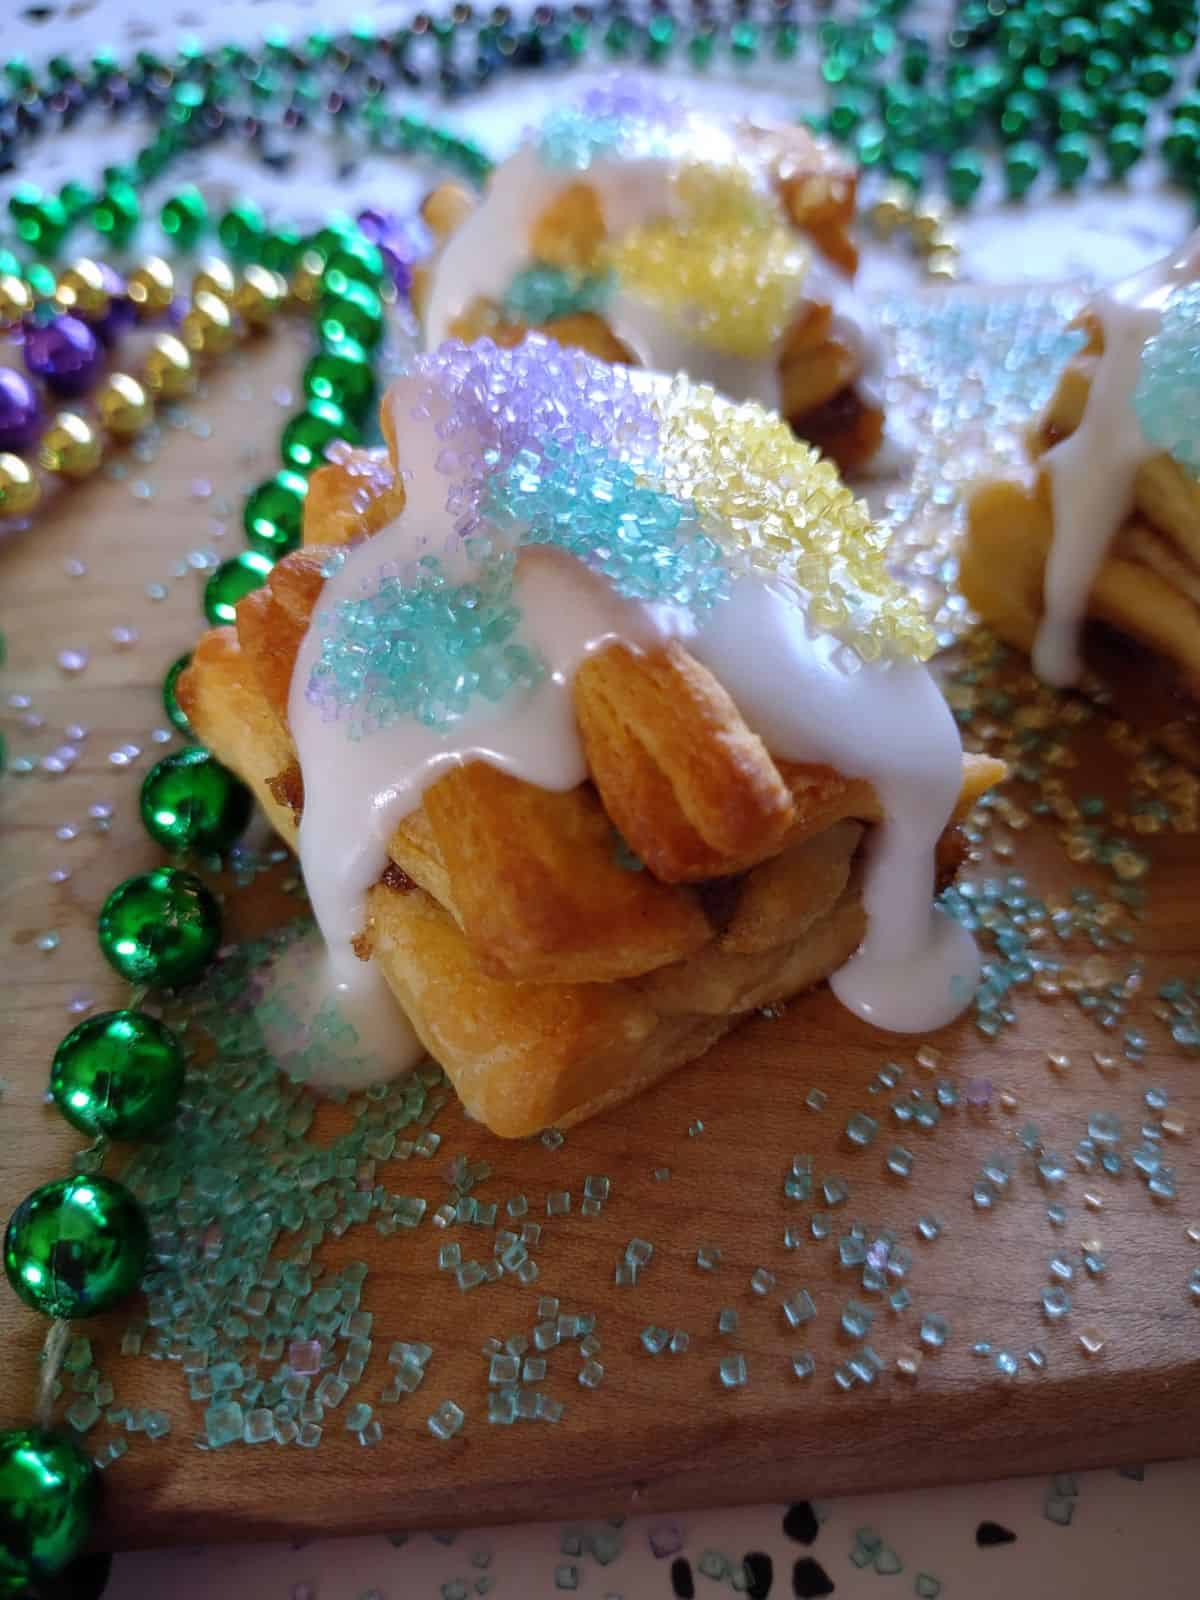 A side view of the layers of mini king cakes made from Crescent roll dough. It's topped with icing with green, yellow. and purple sanding sugars. Mardi Gras beads are in the background.